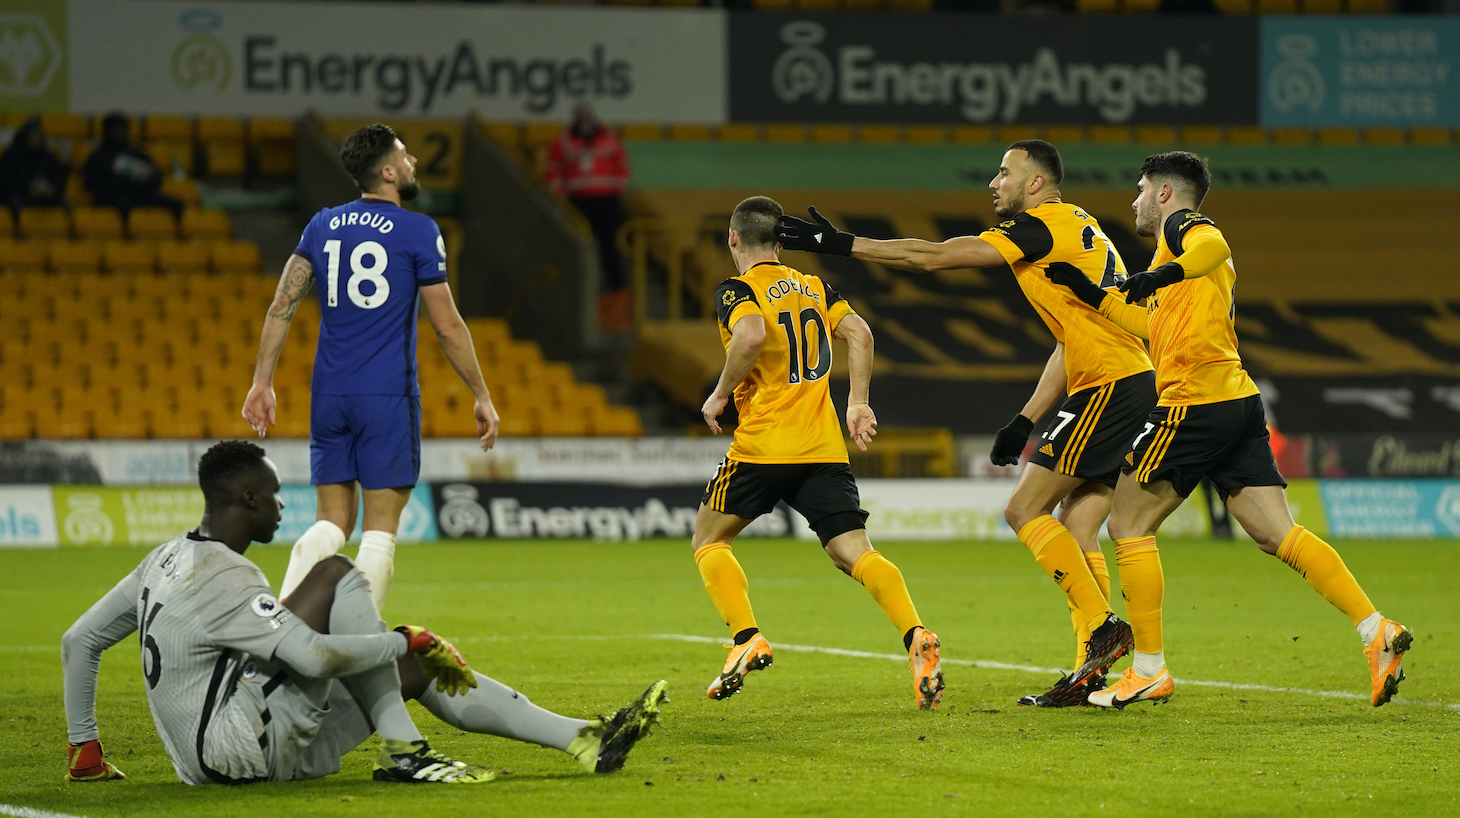 Daniel Podence of Wolverhampton Wanderers celebrates with teammates Romain Saiss and Pedro Neto after scoring their team's first goal during the Premier League match between Wolverhampton Wanderers and Chelsea at Molineux on December 15, 2020 in Wolverhampton, England. The match will be played without fans, behind closed doors as a Covid-19 precaution.